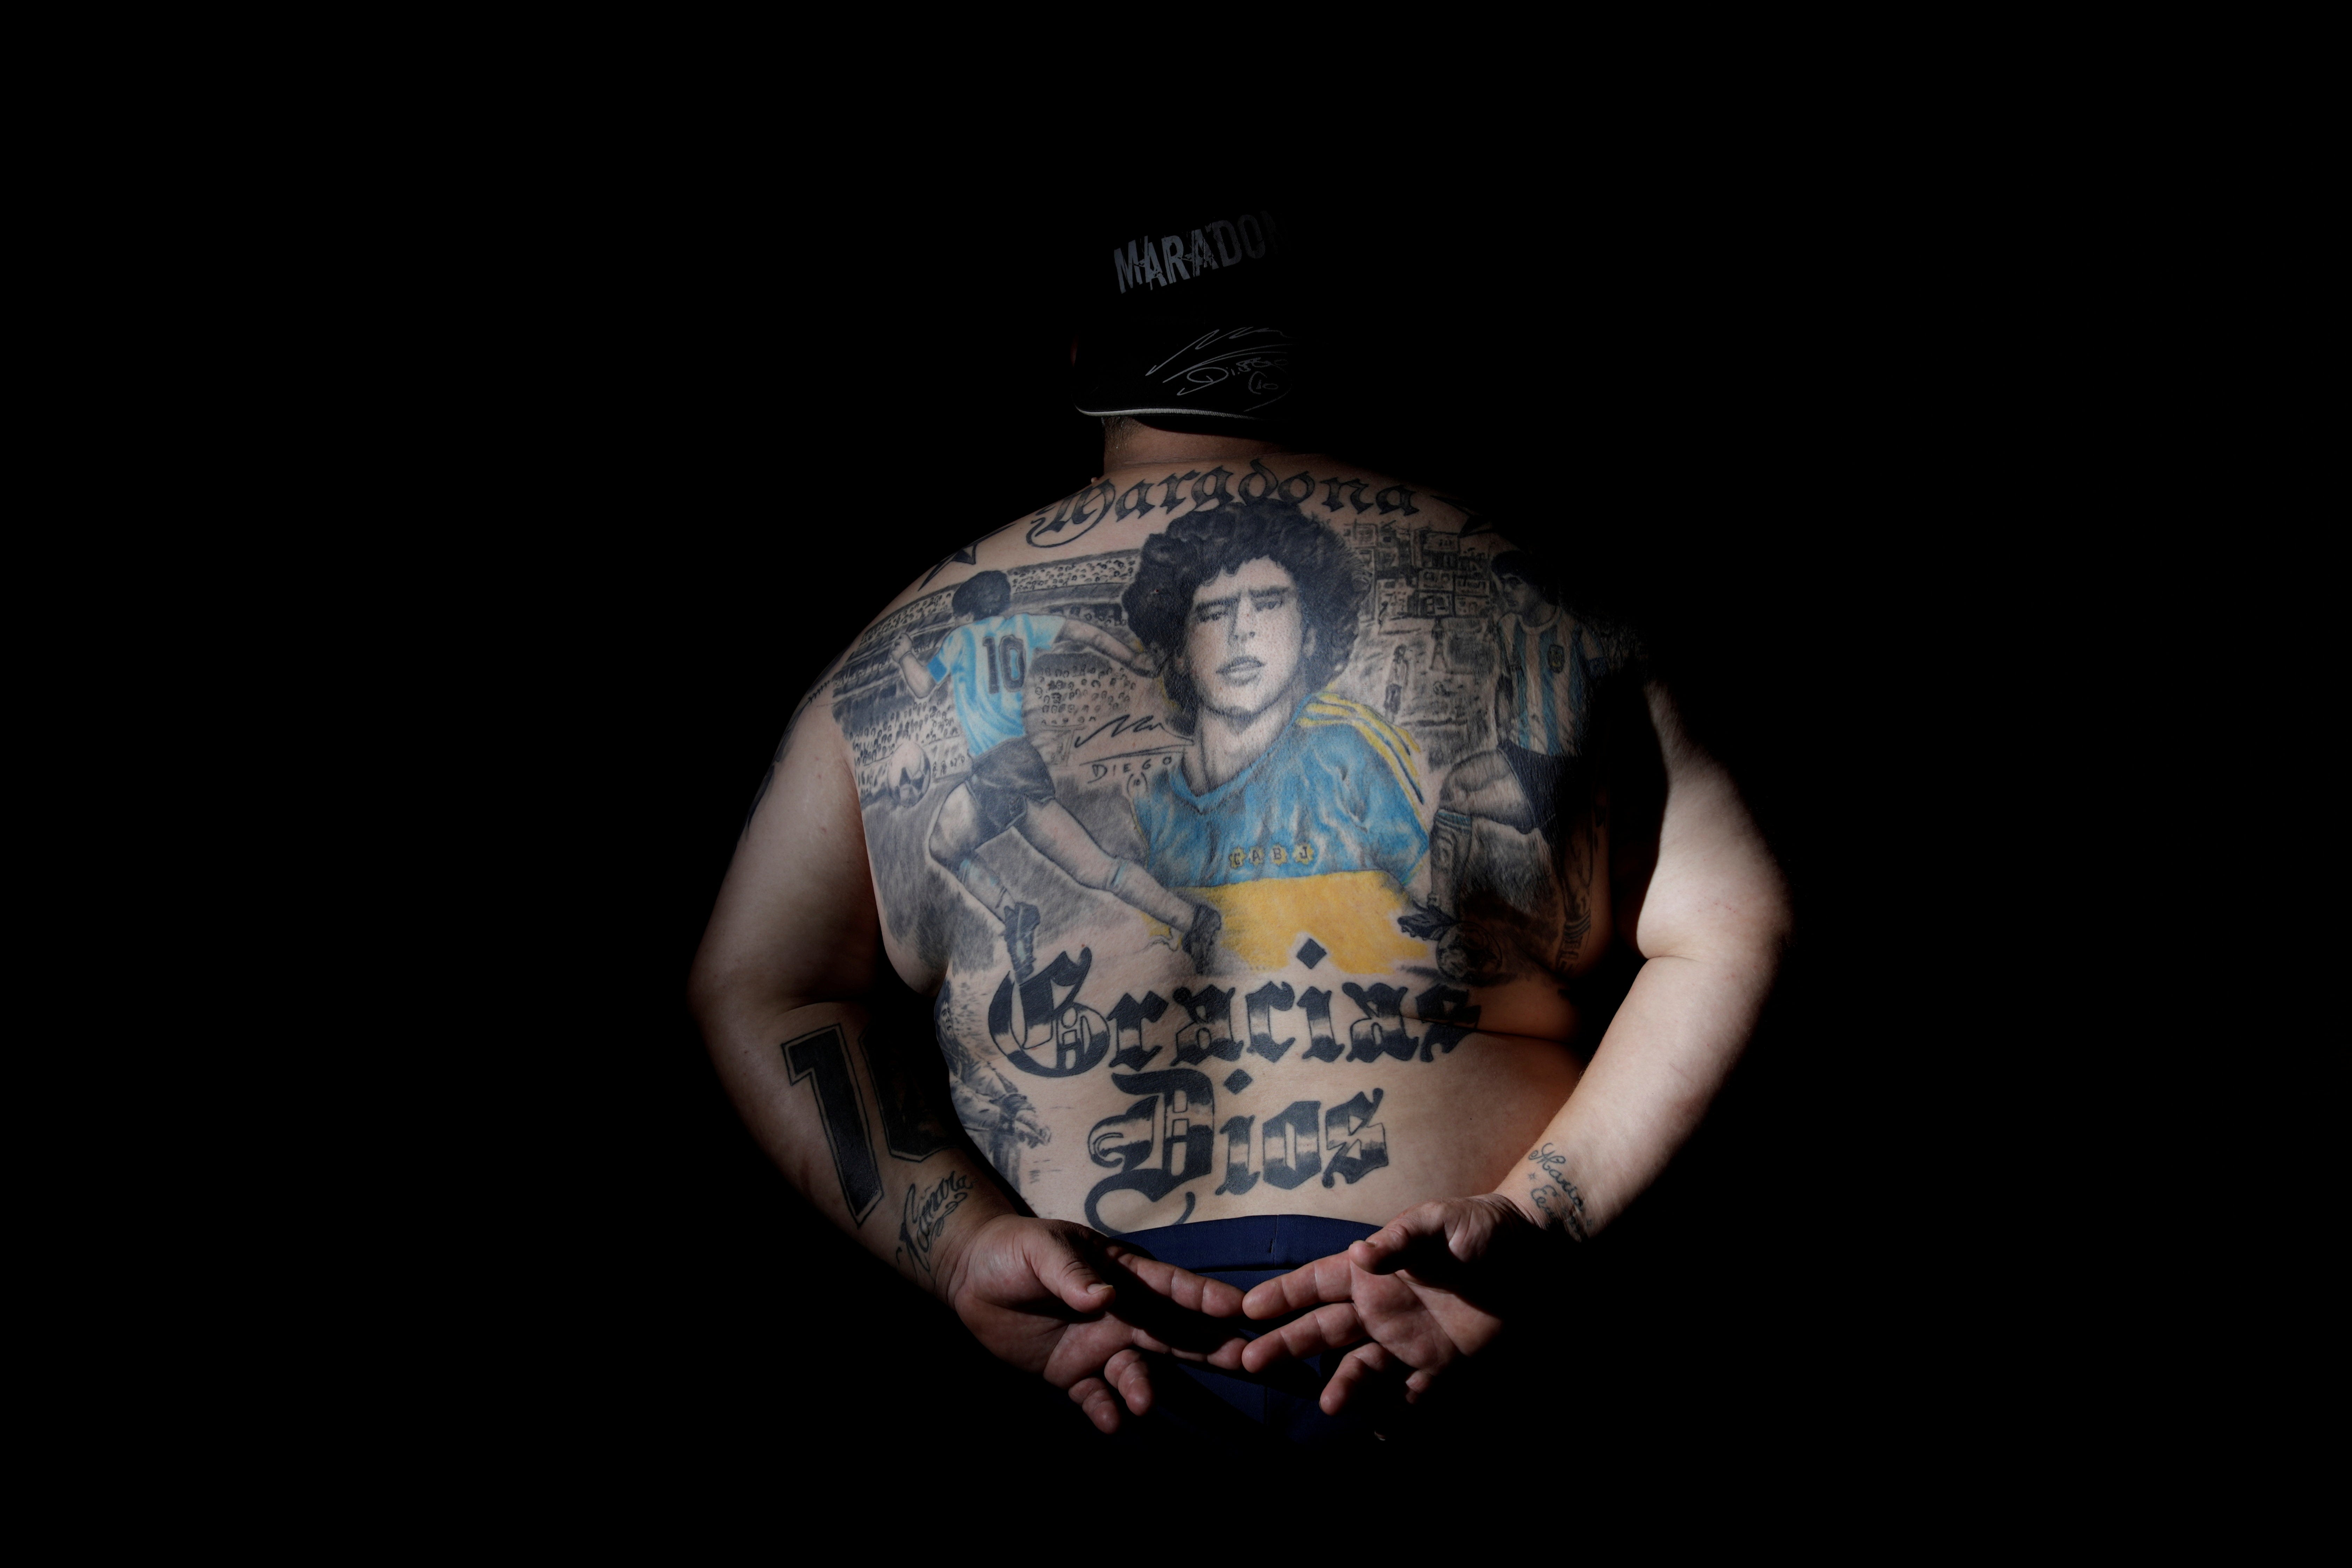 Guillermo Rodriguez, a devoted Diego Maradona fan, shows his tattoos at his pizza shop in Buenos Aires